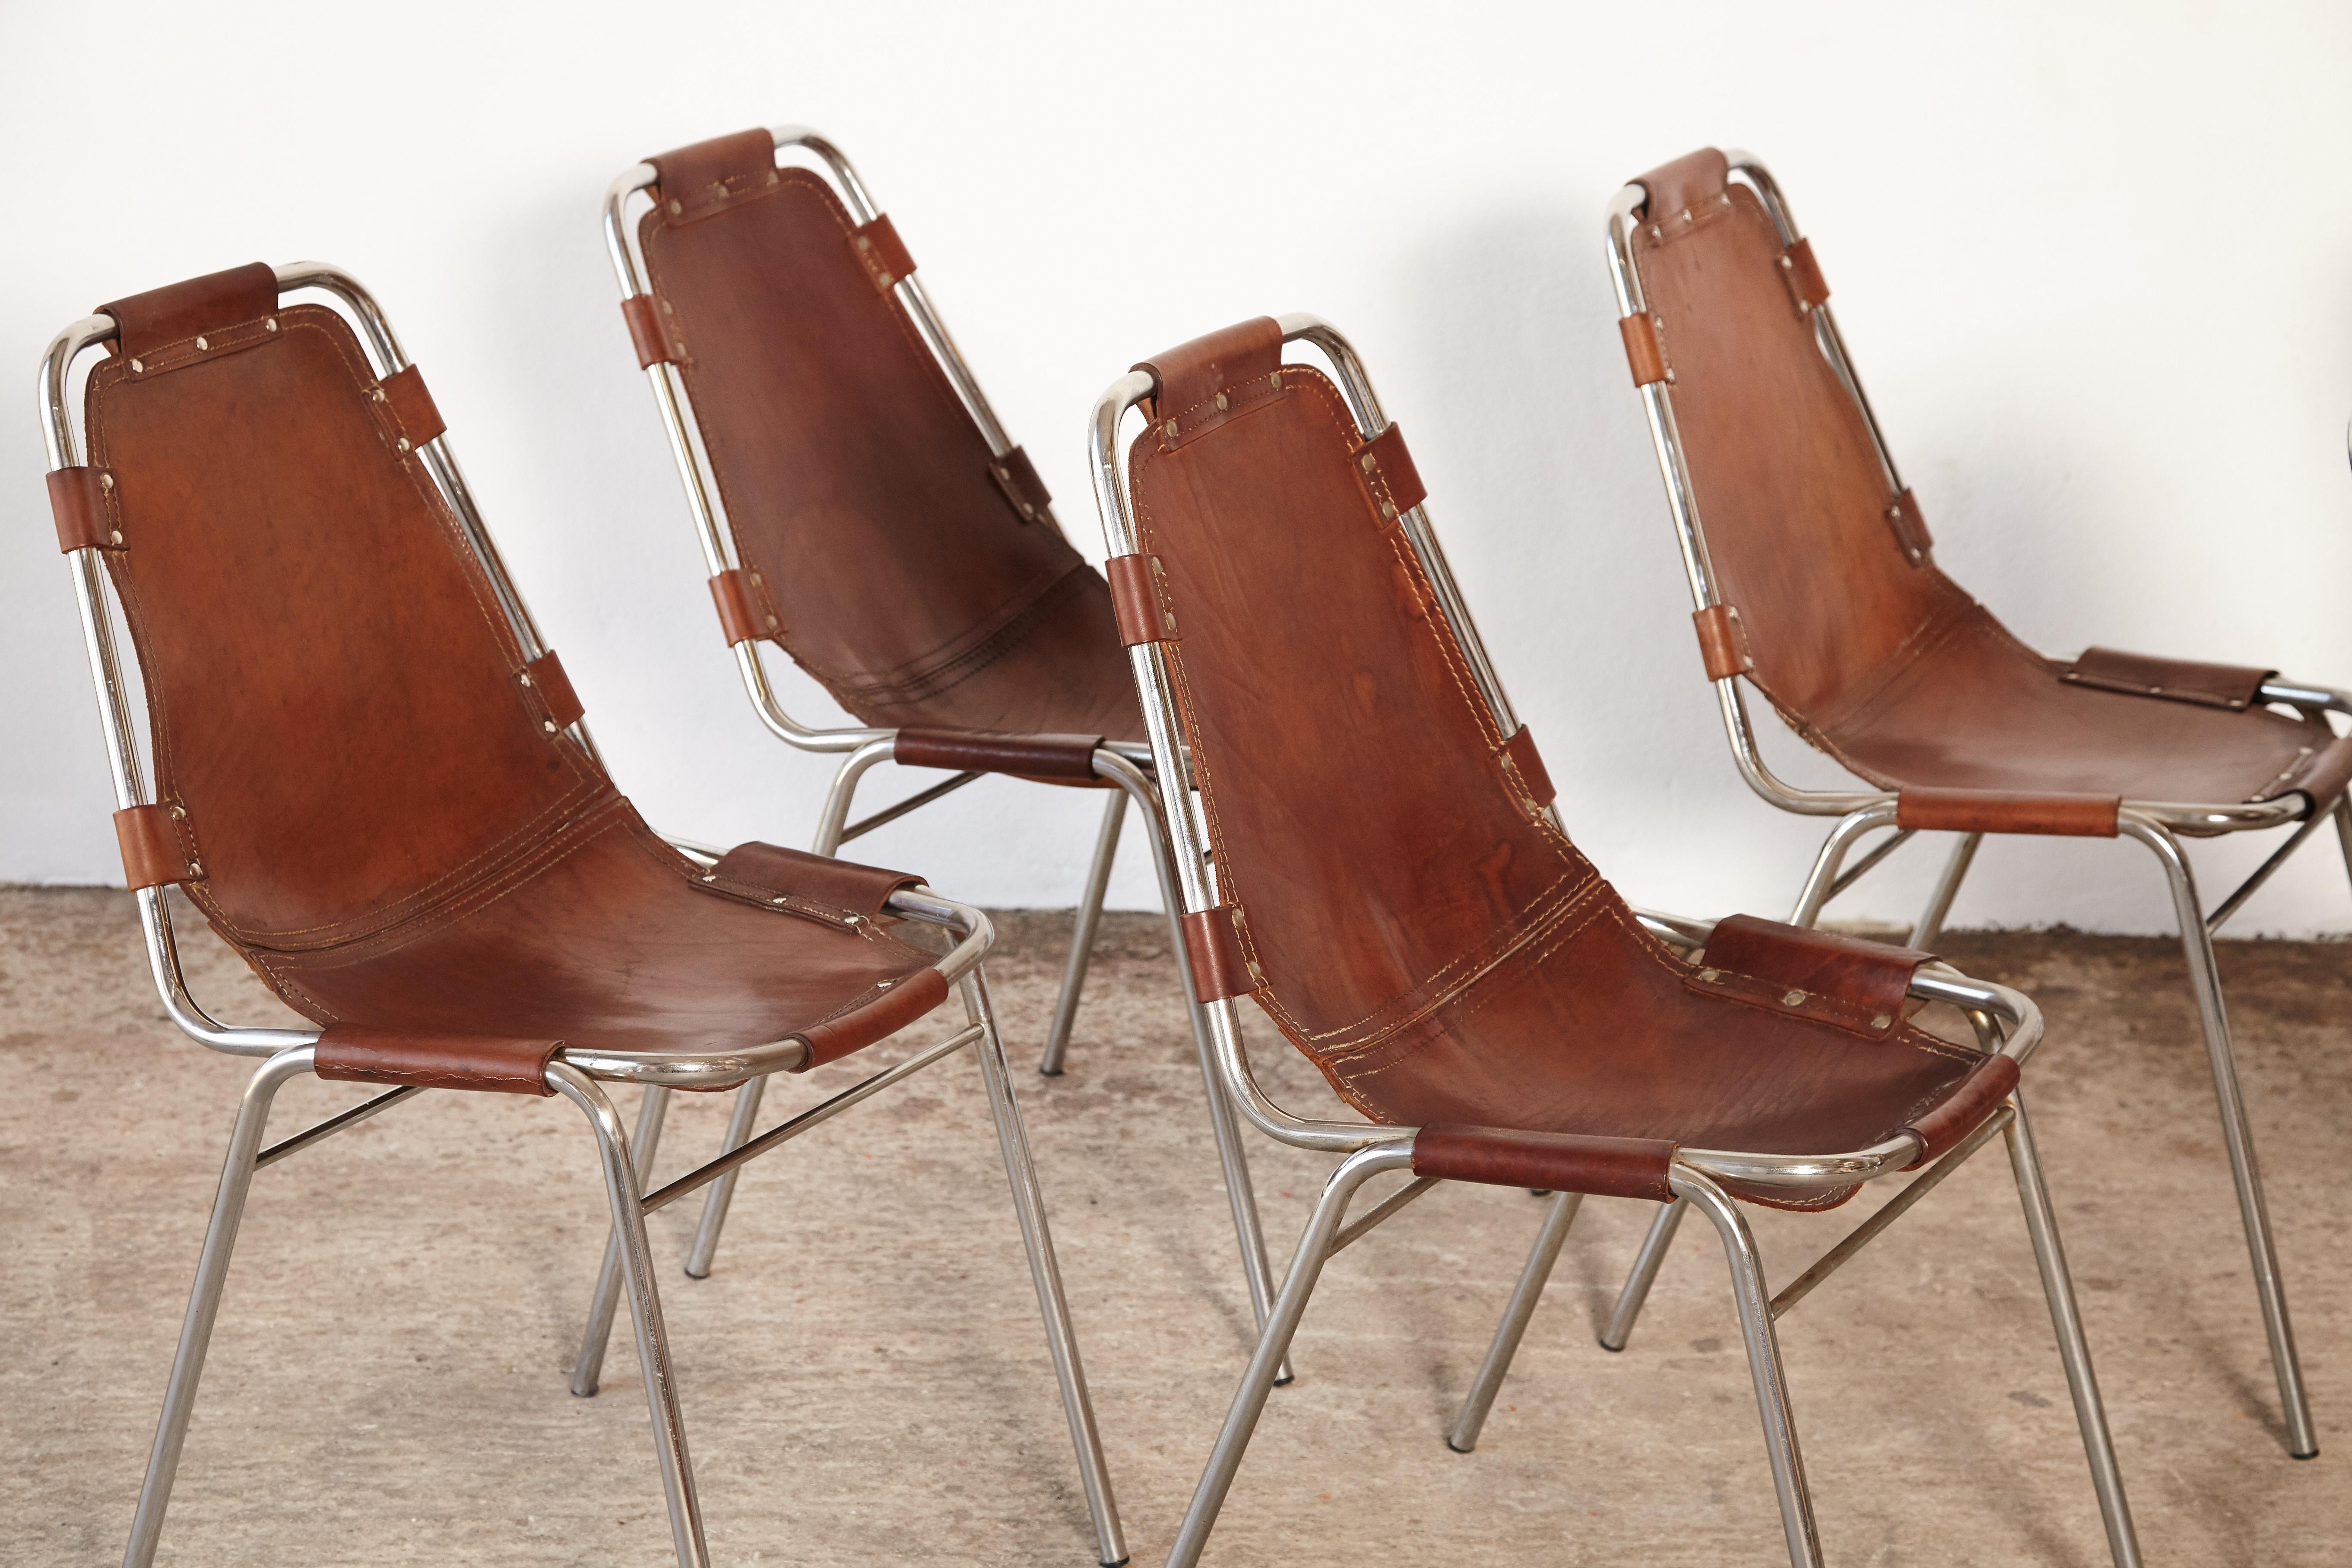 20th Century Set of 8 'Les Arcs' Chairs Selected by Charlotte Perriand, France / Italy, 1970s